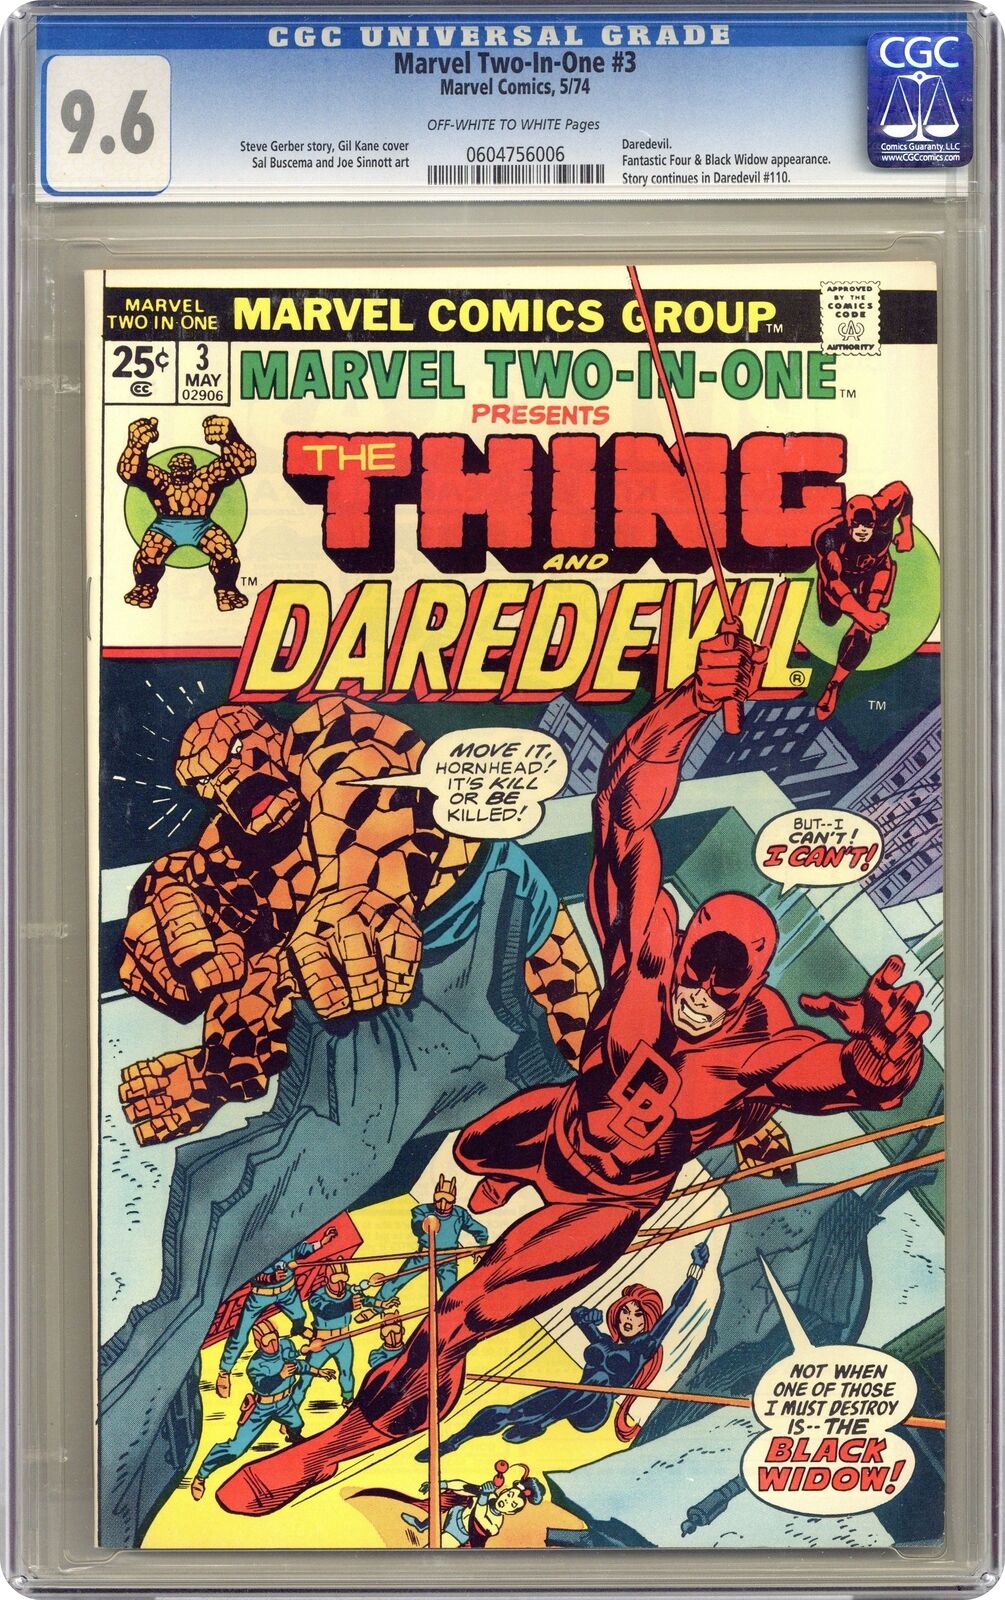 Marvel Two-in-One #3 CGC 9.6 1974 0604756006